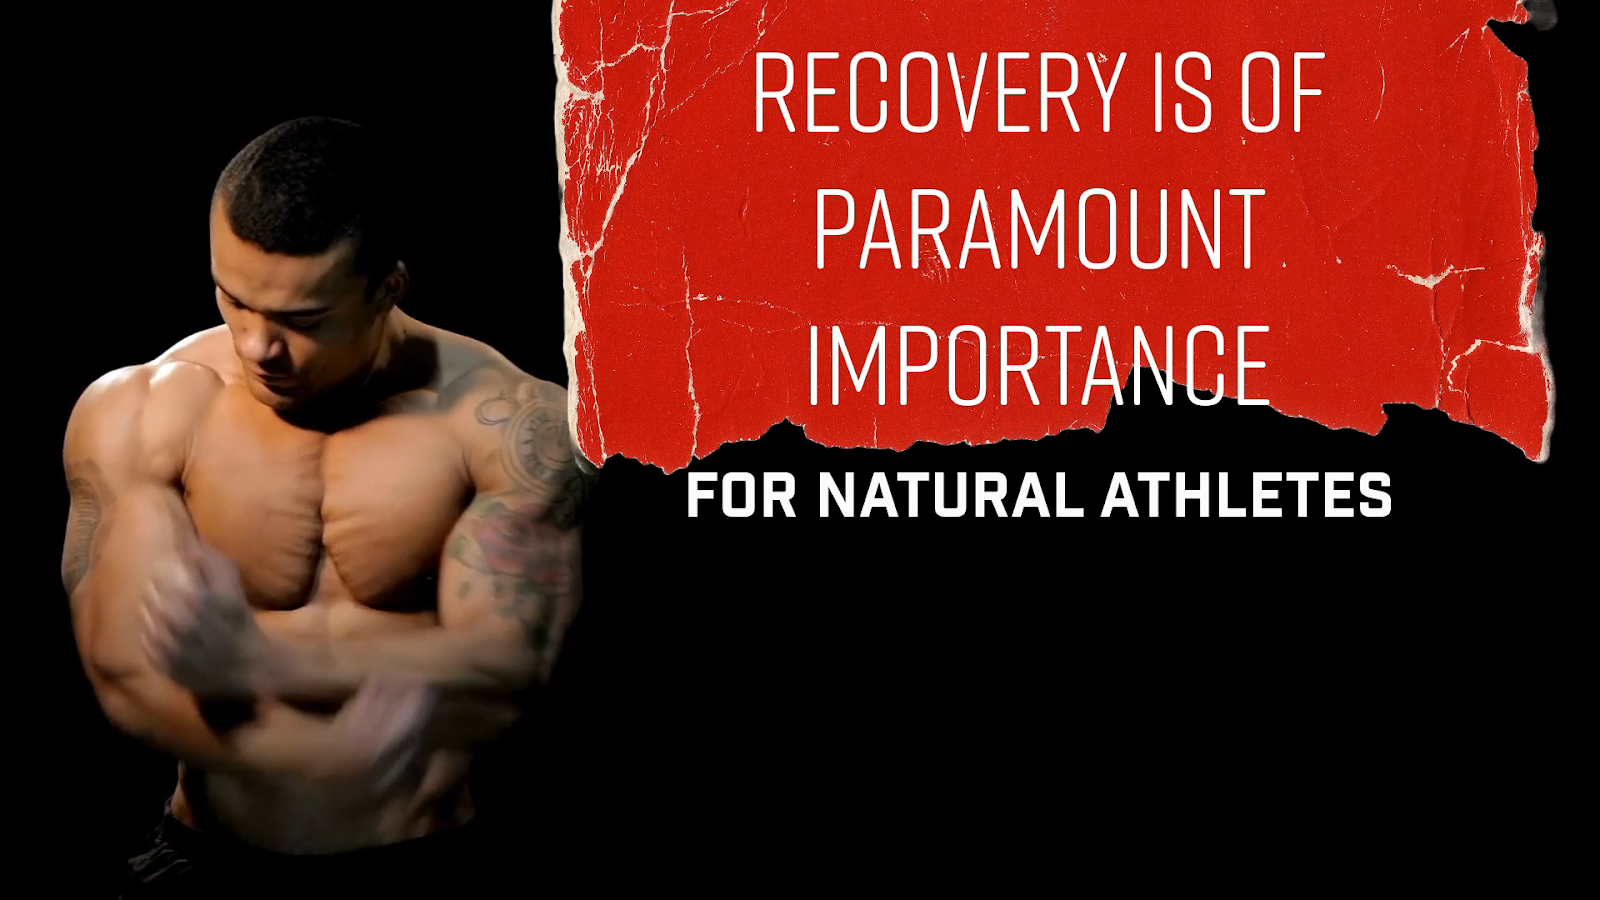 Recovery after high intensity training is extremely important for natural bodybuilders and athletes